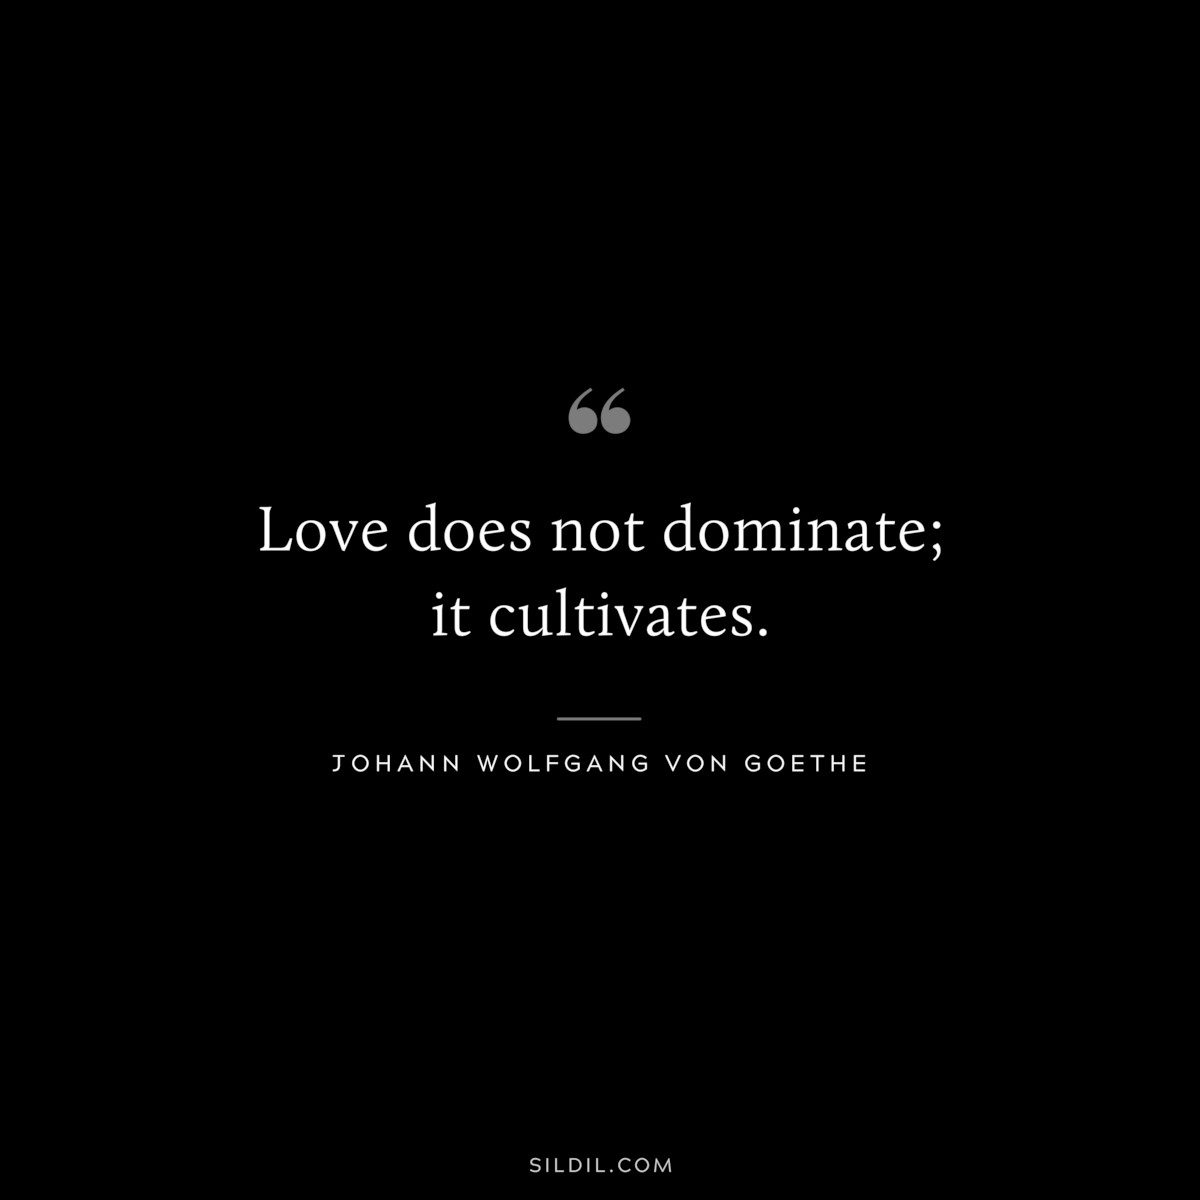 Love does not dominate; it cultivates.― Johann Wolfgang von Goethe